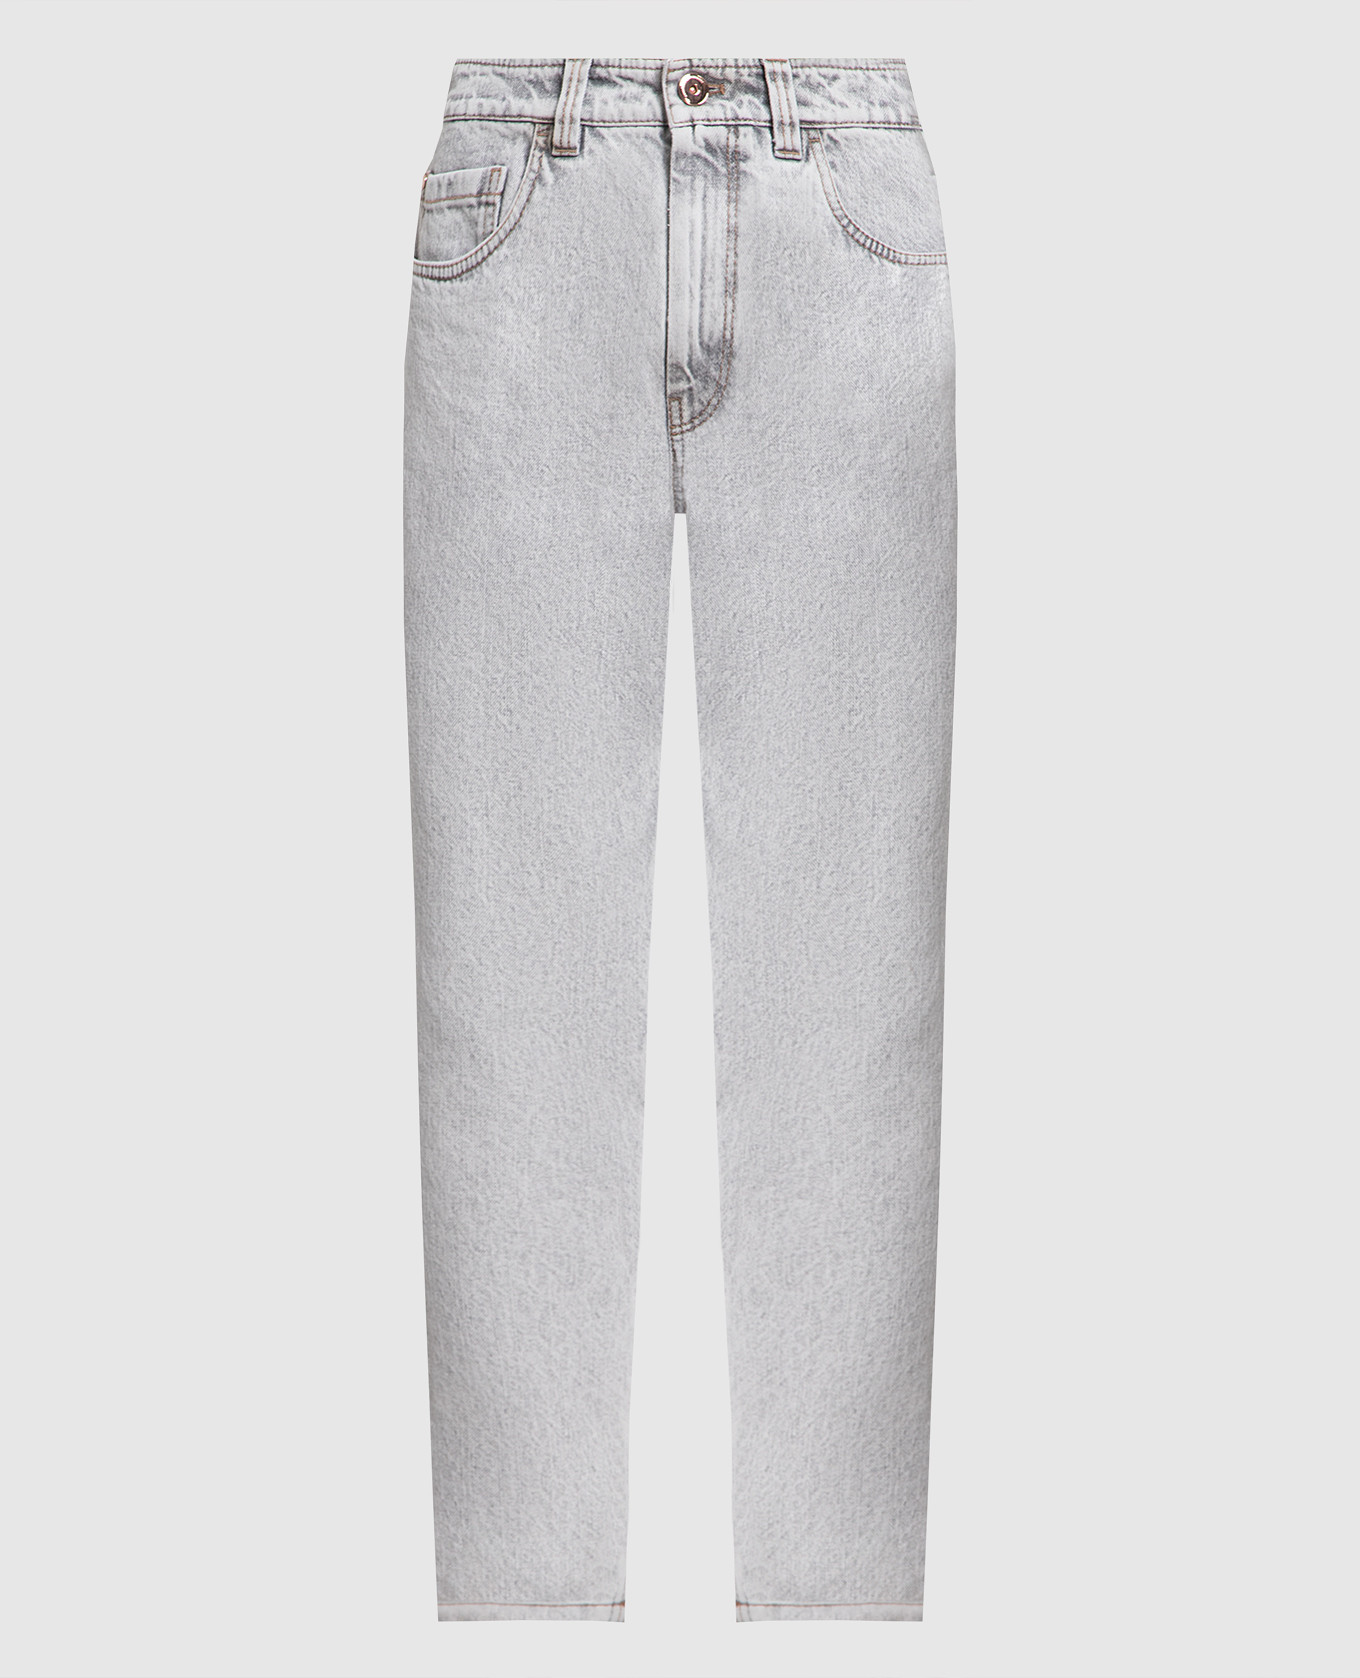 Gray jeans with monil chain